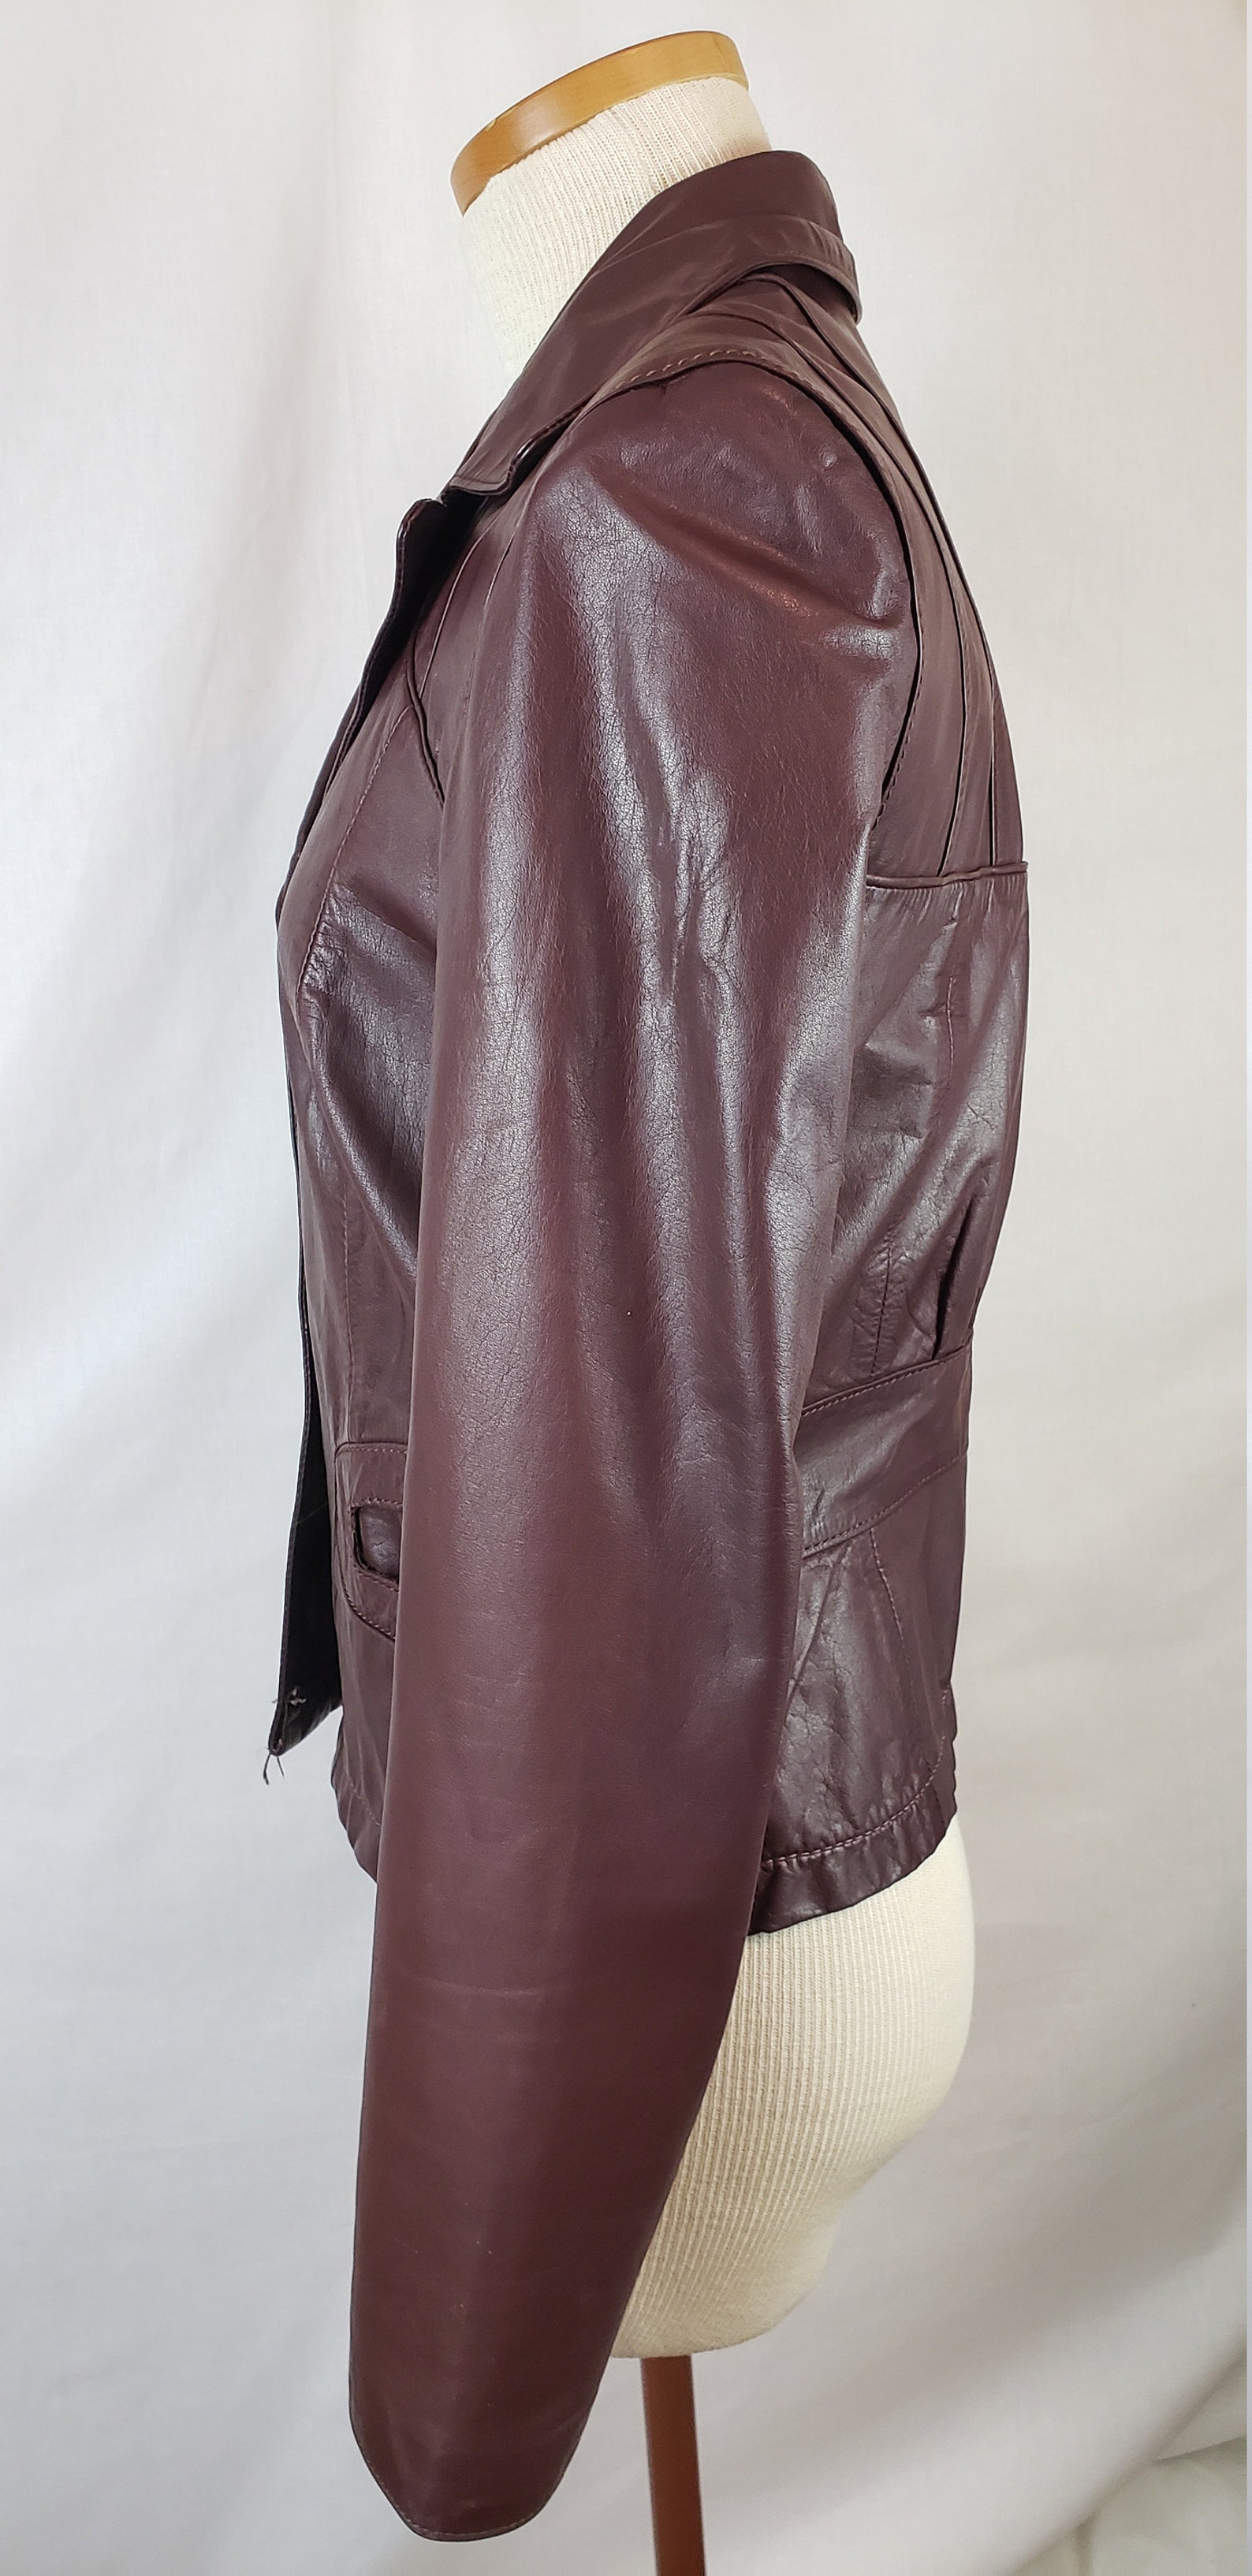 Vintage Women's Burgundy Leather Retro Fitted Jacket | Etsy